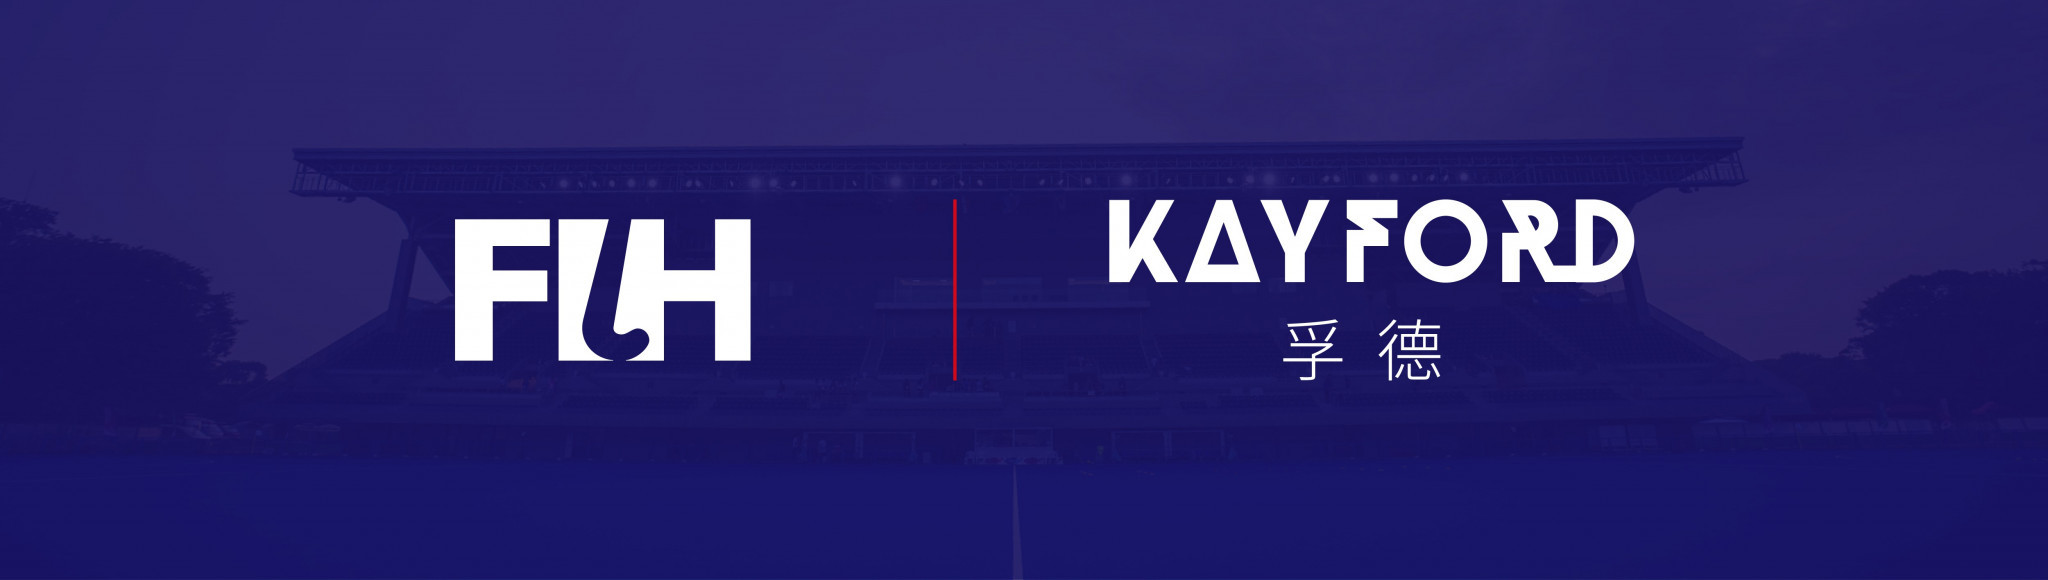 The International Hockey Federation has signed an agreement with Kayford Branding ©FIH